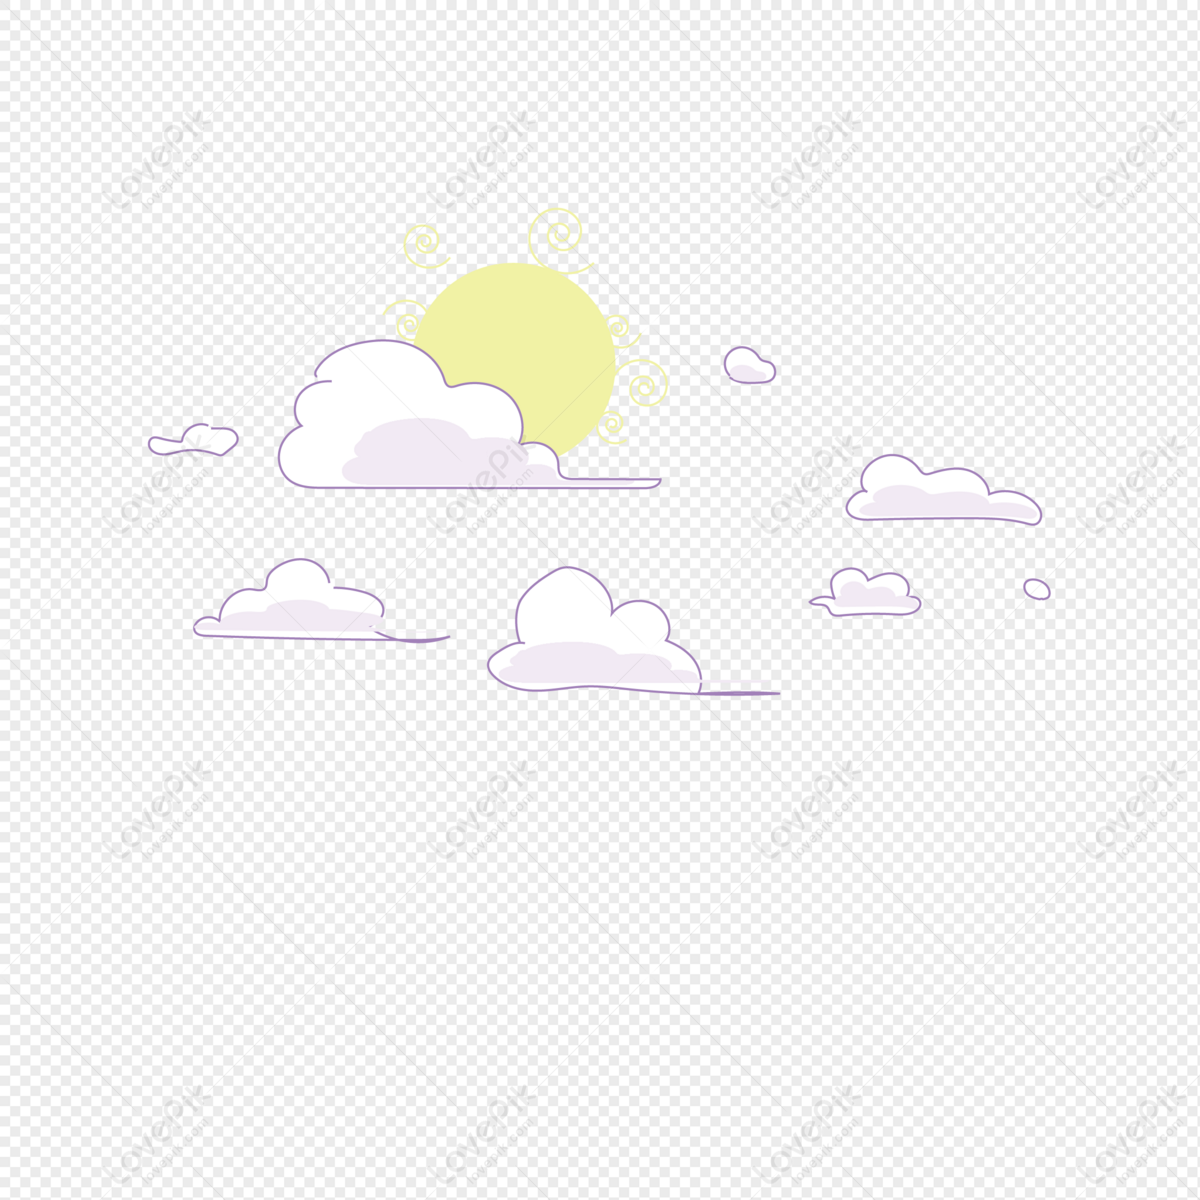 Cartoon Cloud Sun PNG Image Free Download And Clipart Image For Free  Download - Lovepik | 401072511